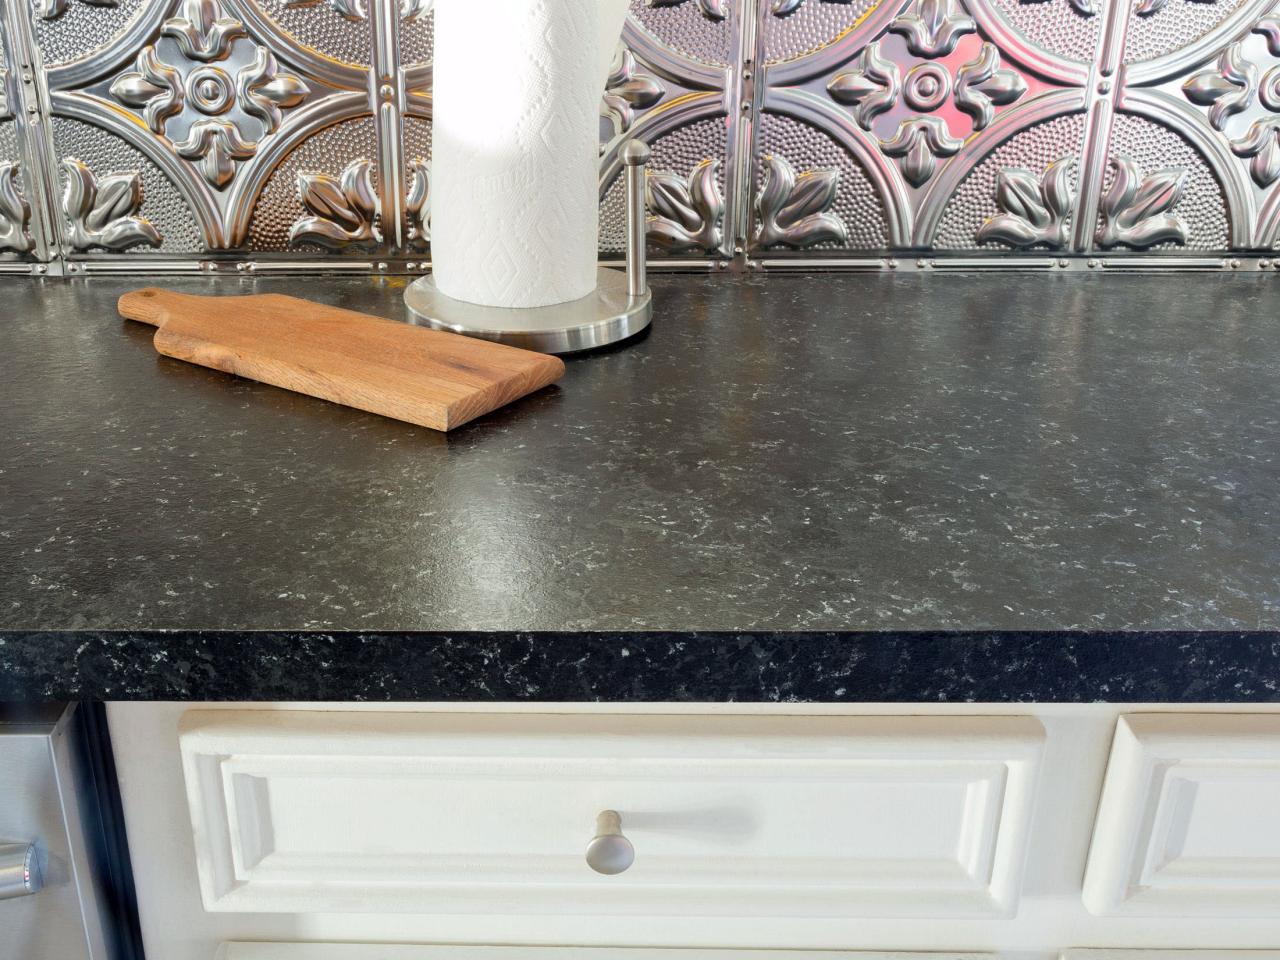 How To Paint A Laminate Countertop, Can You Paint Your Countertops To Look Like Granite